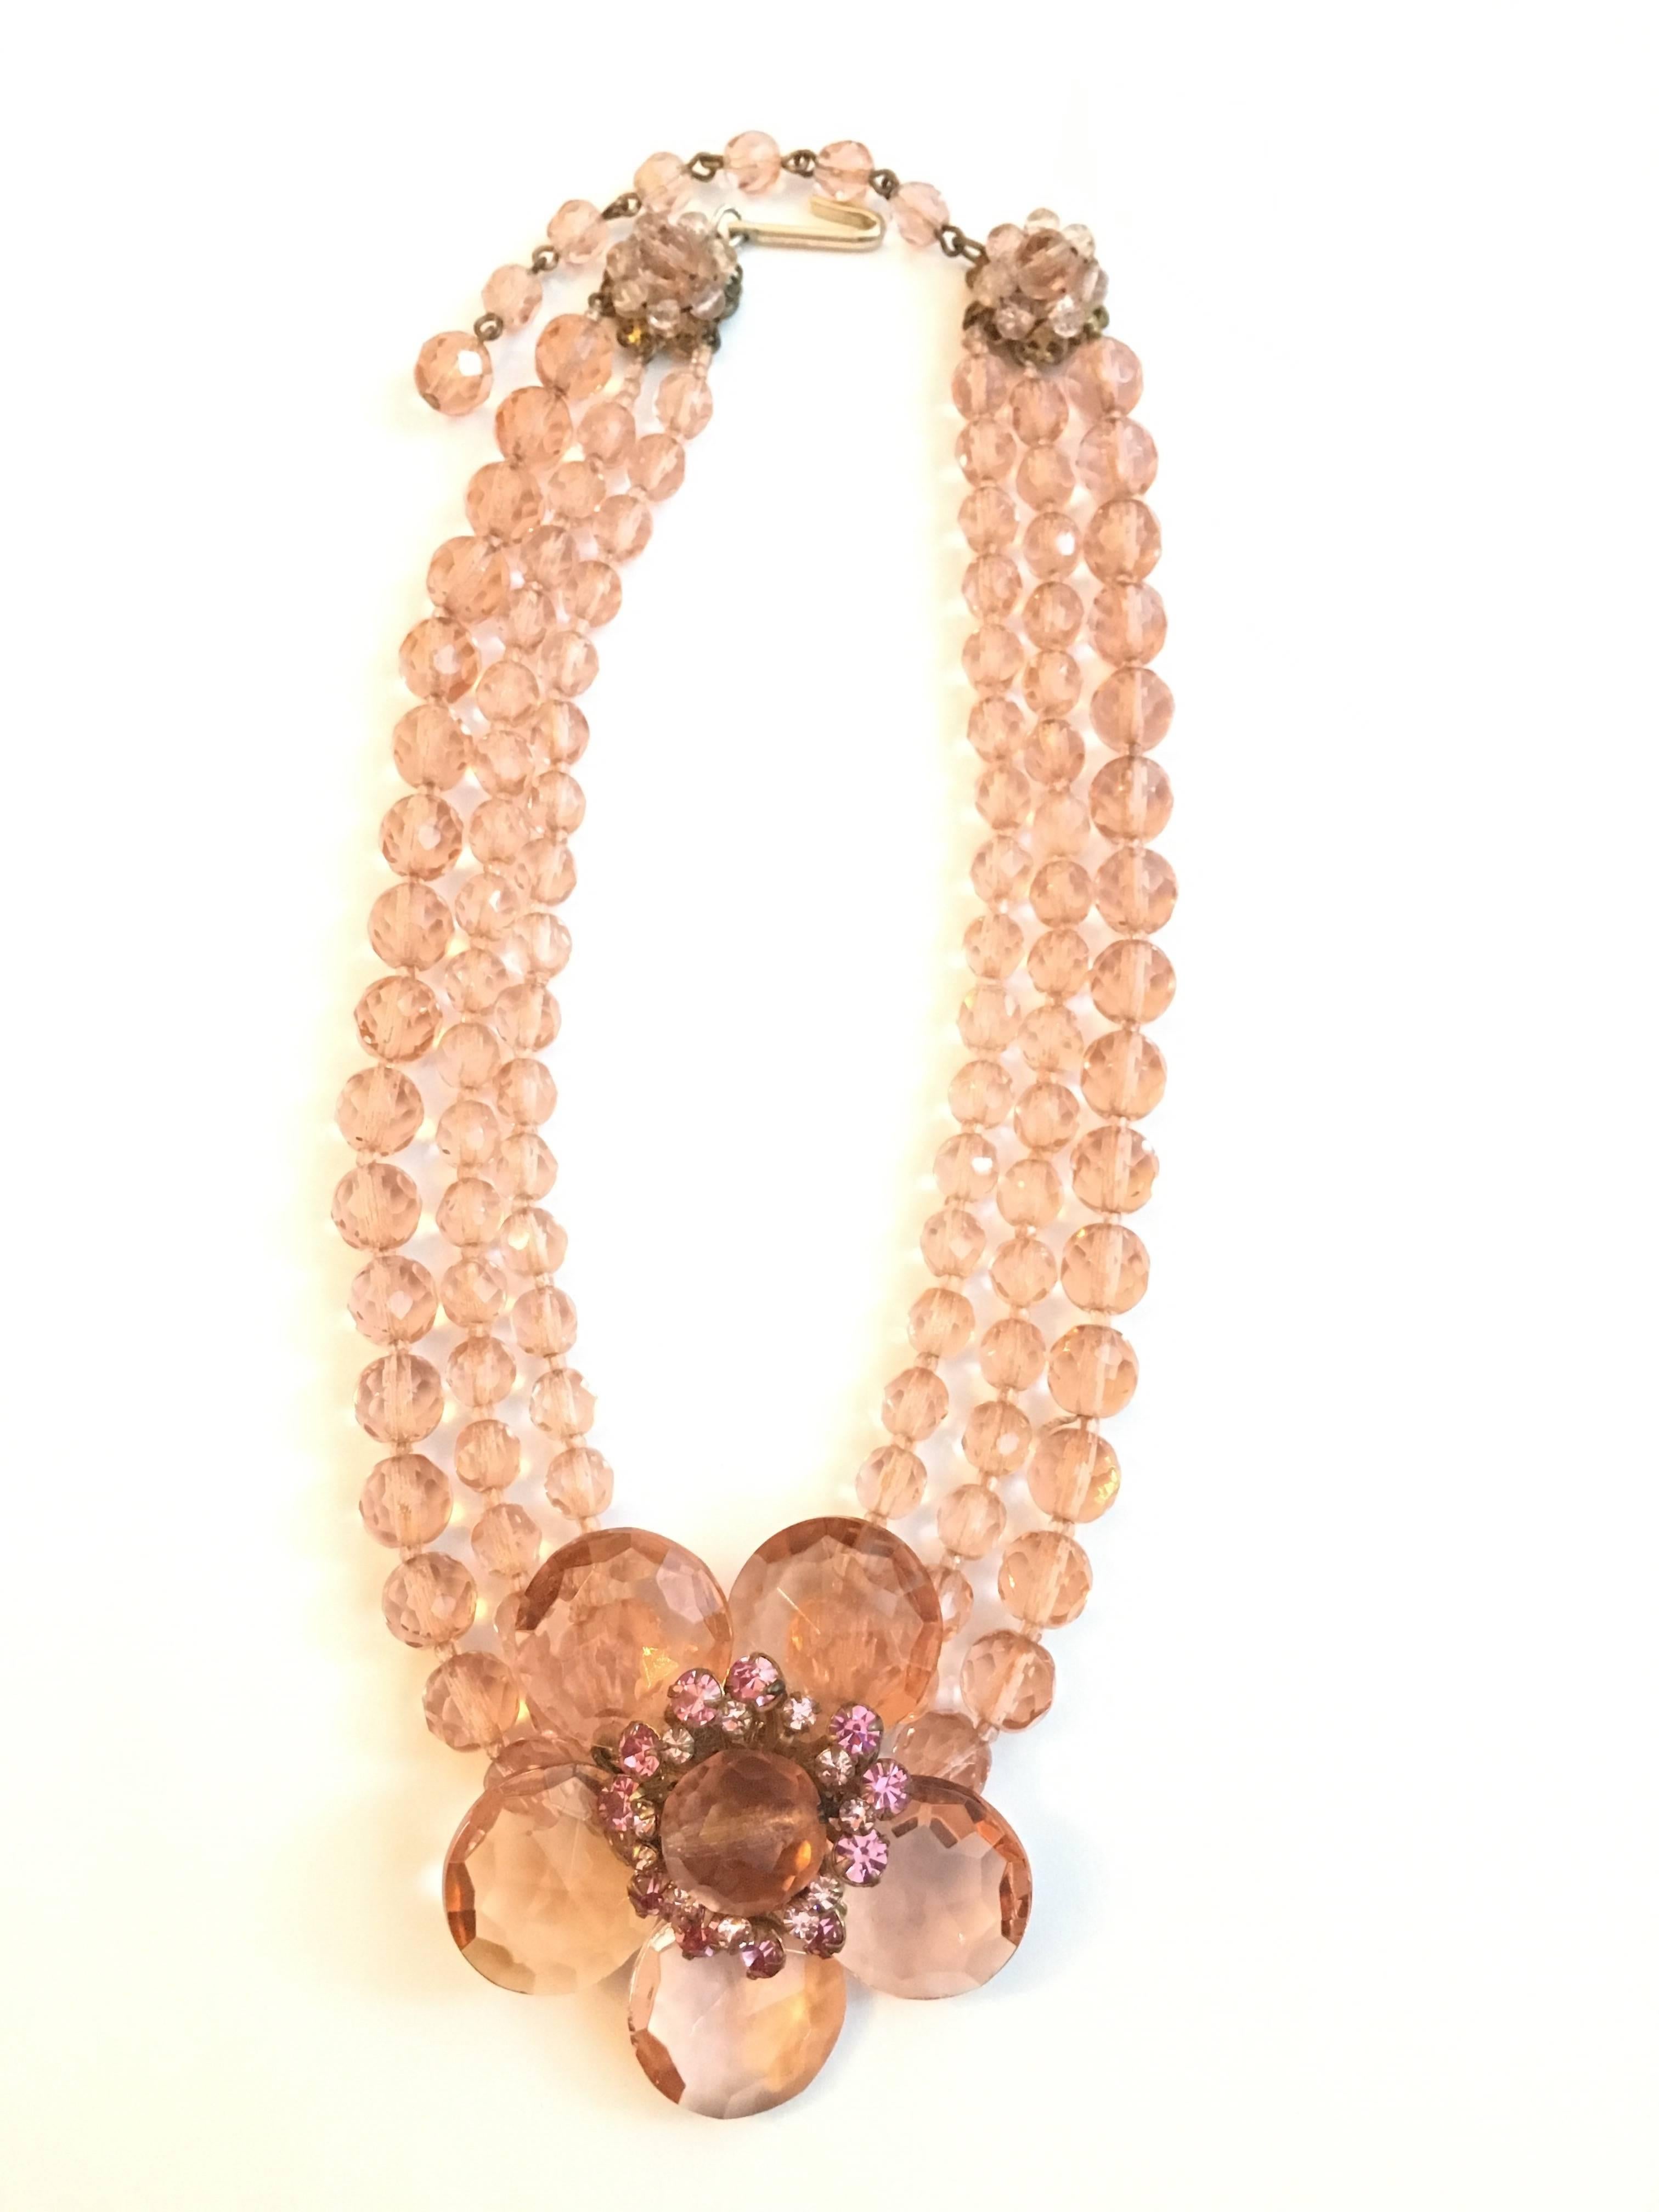 This beautiful three strand Miriam Haskell choker necklace is made up of pale peachy pink bohemian glass crystals. It features a large five petaled flower in the center which is mounted on a classic Haskell gold plated filigree disk. The flower